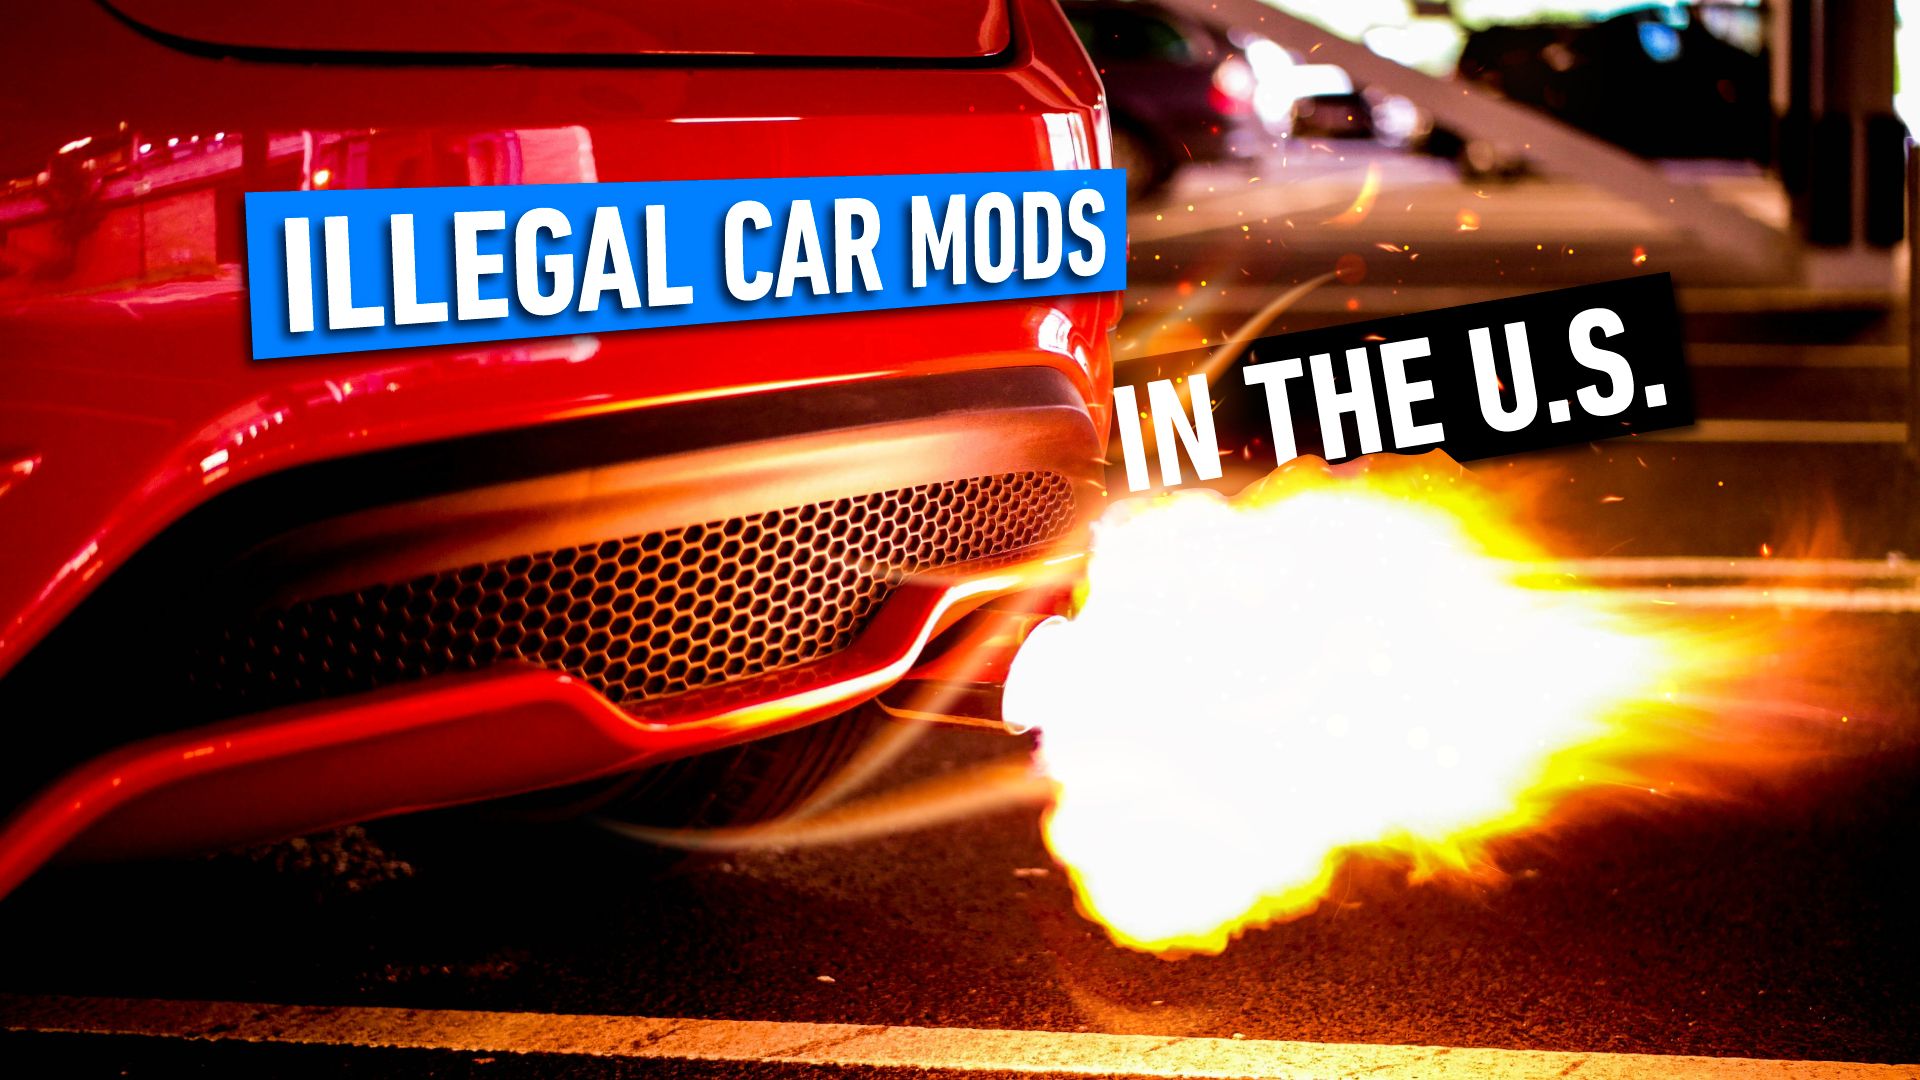 Illegal Car Mods In The U.S. exhaust